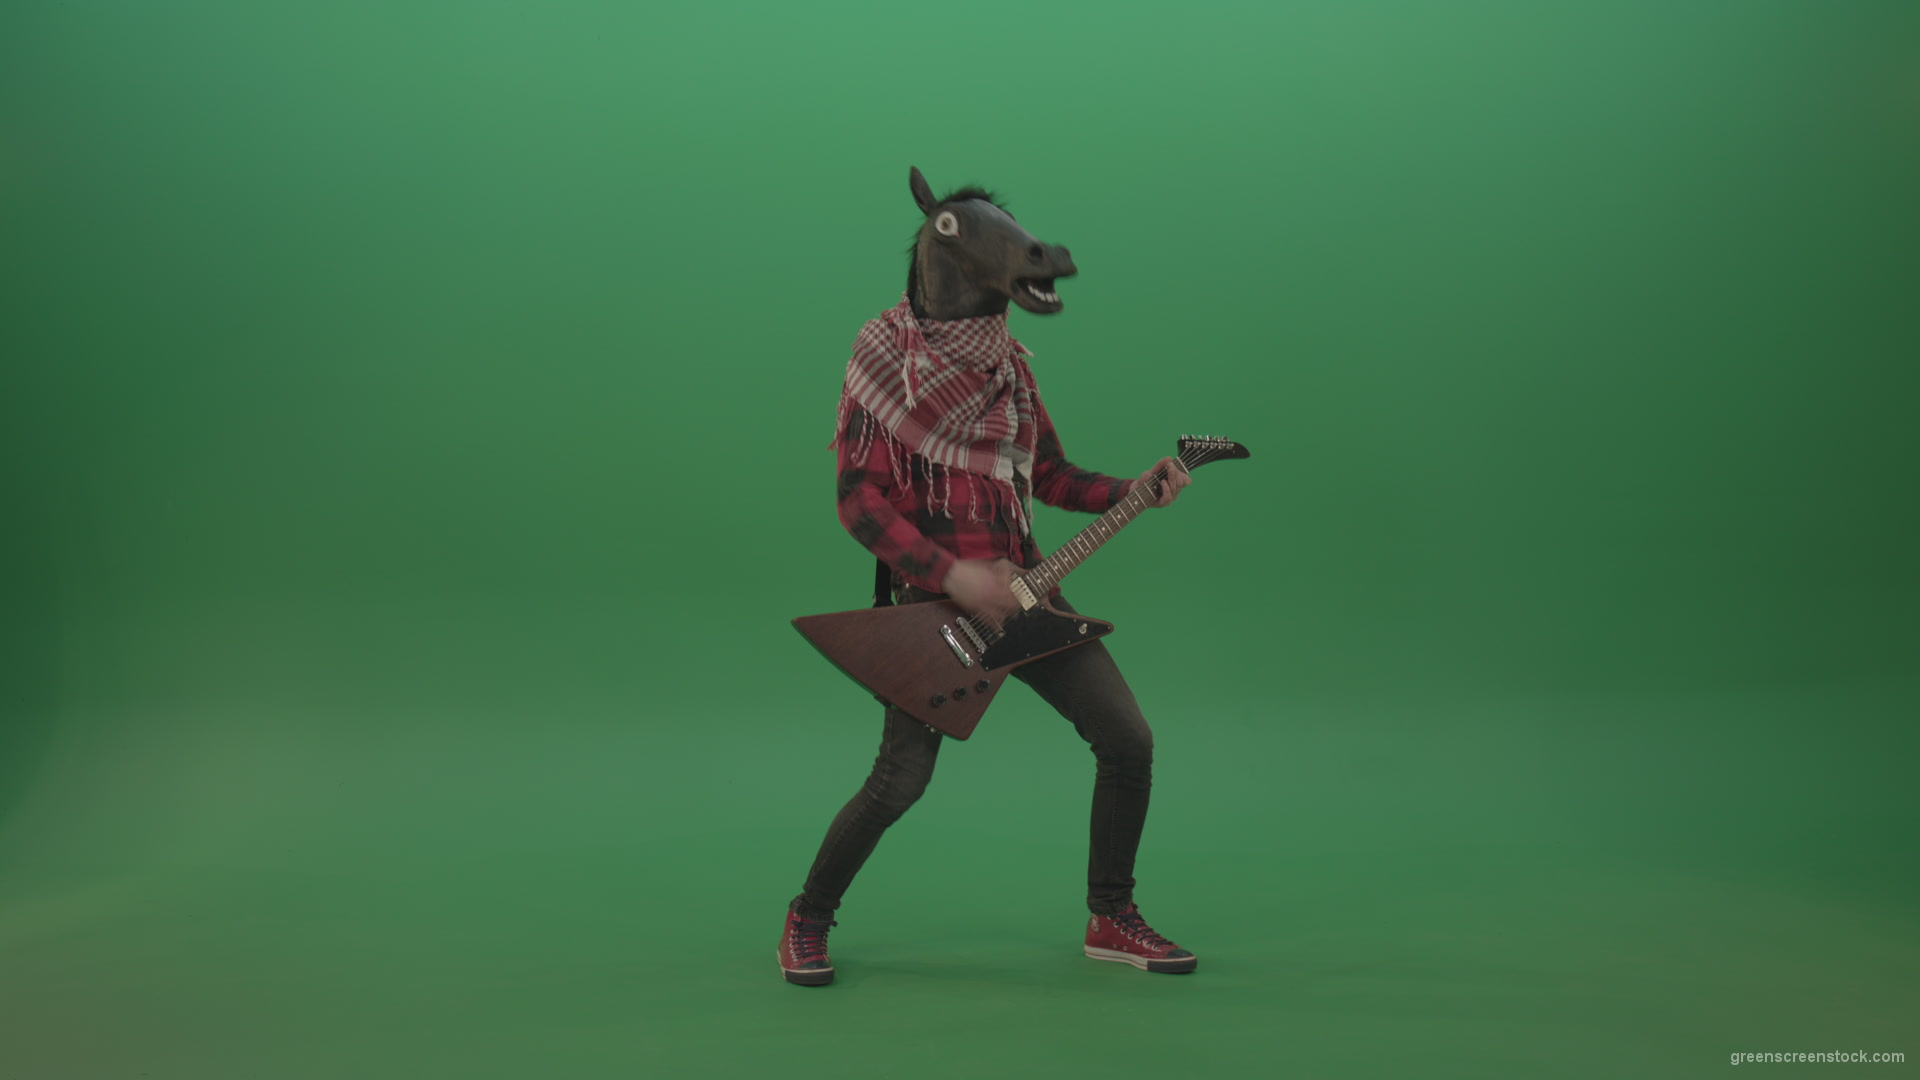 Green-screen-horse-man-guitaris-play-hard-rock-music-with-guitar-isolated-on-green-background_004 Green Screen Stock